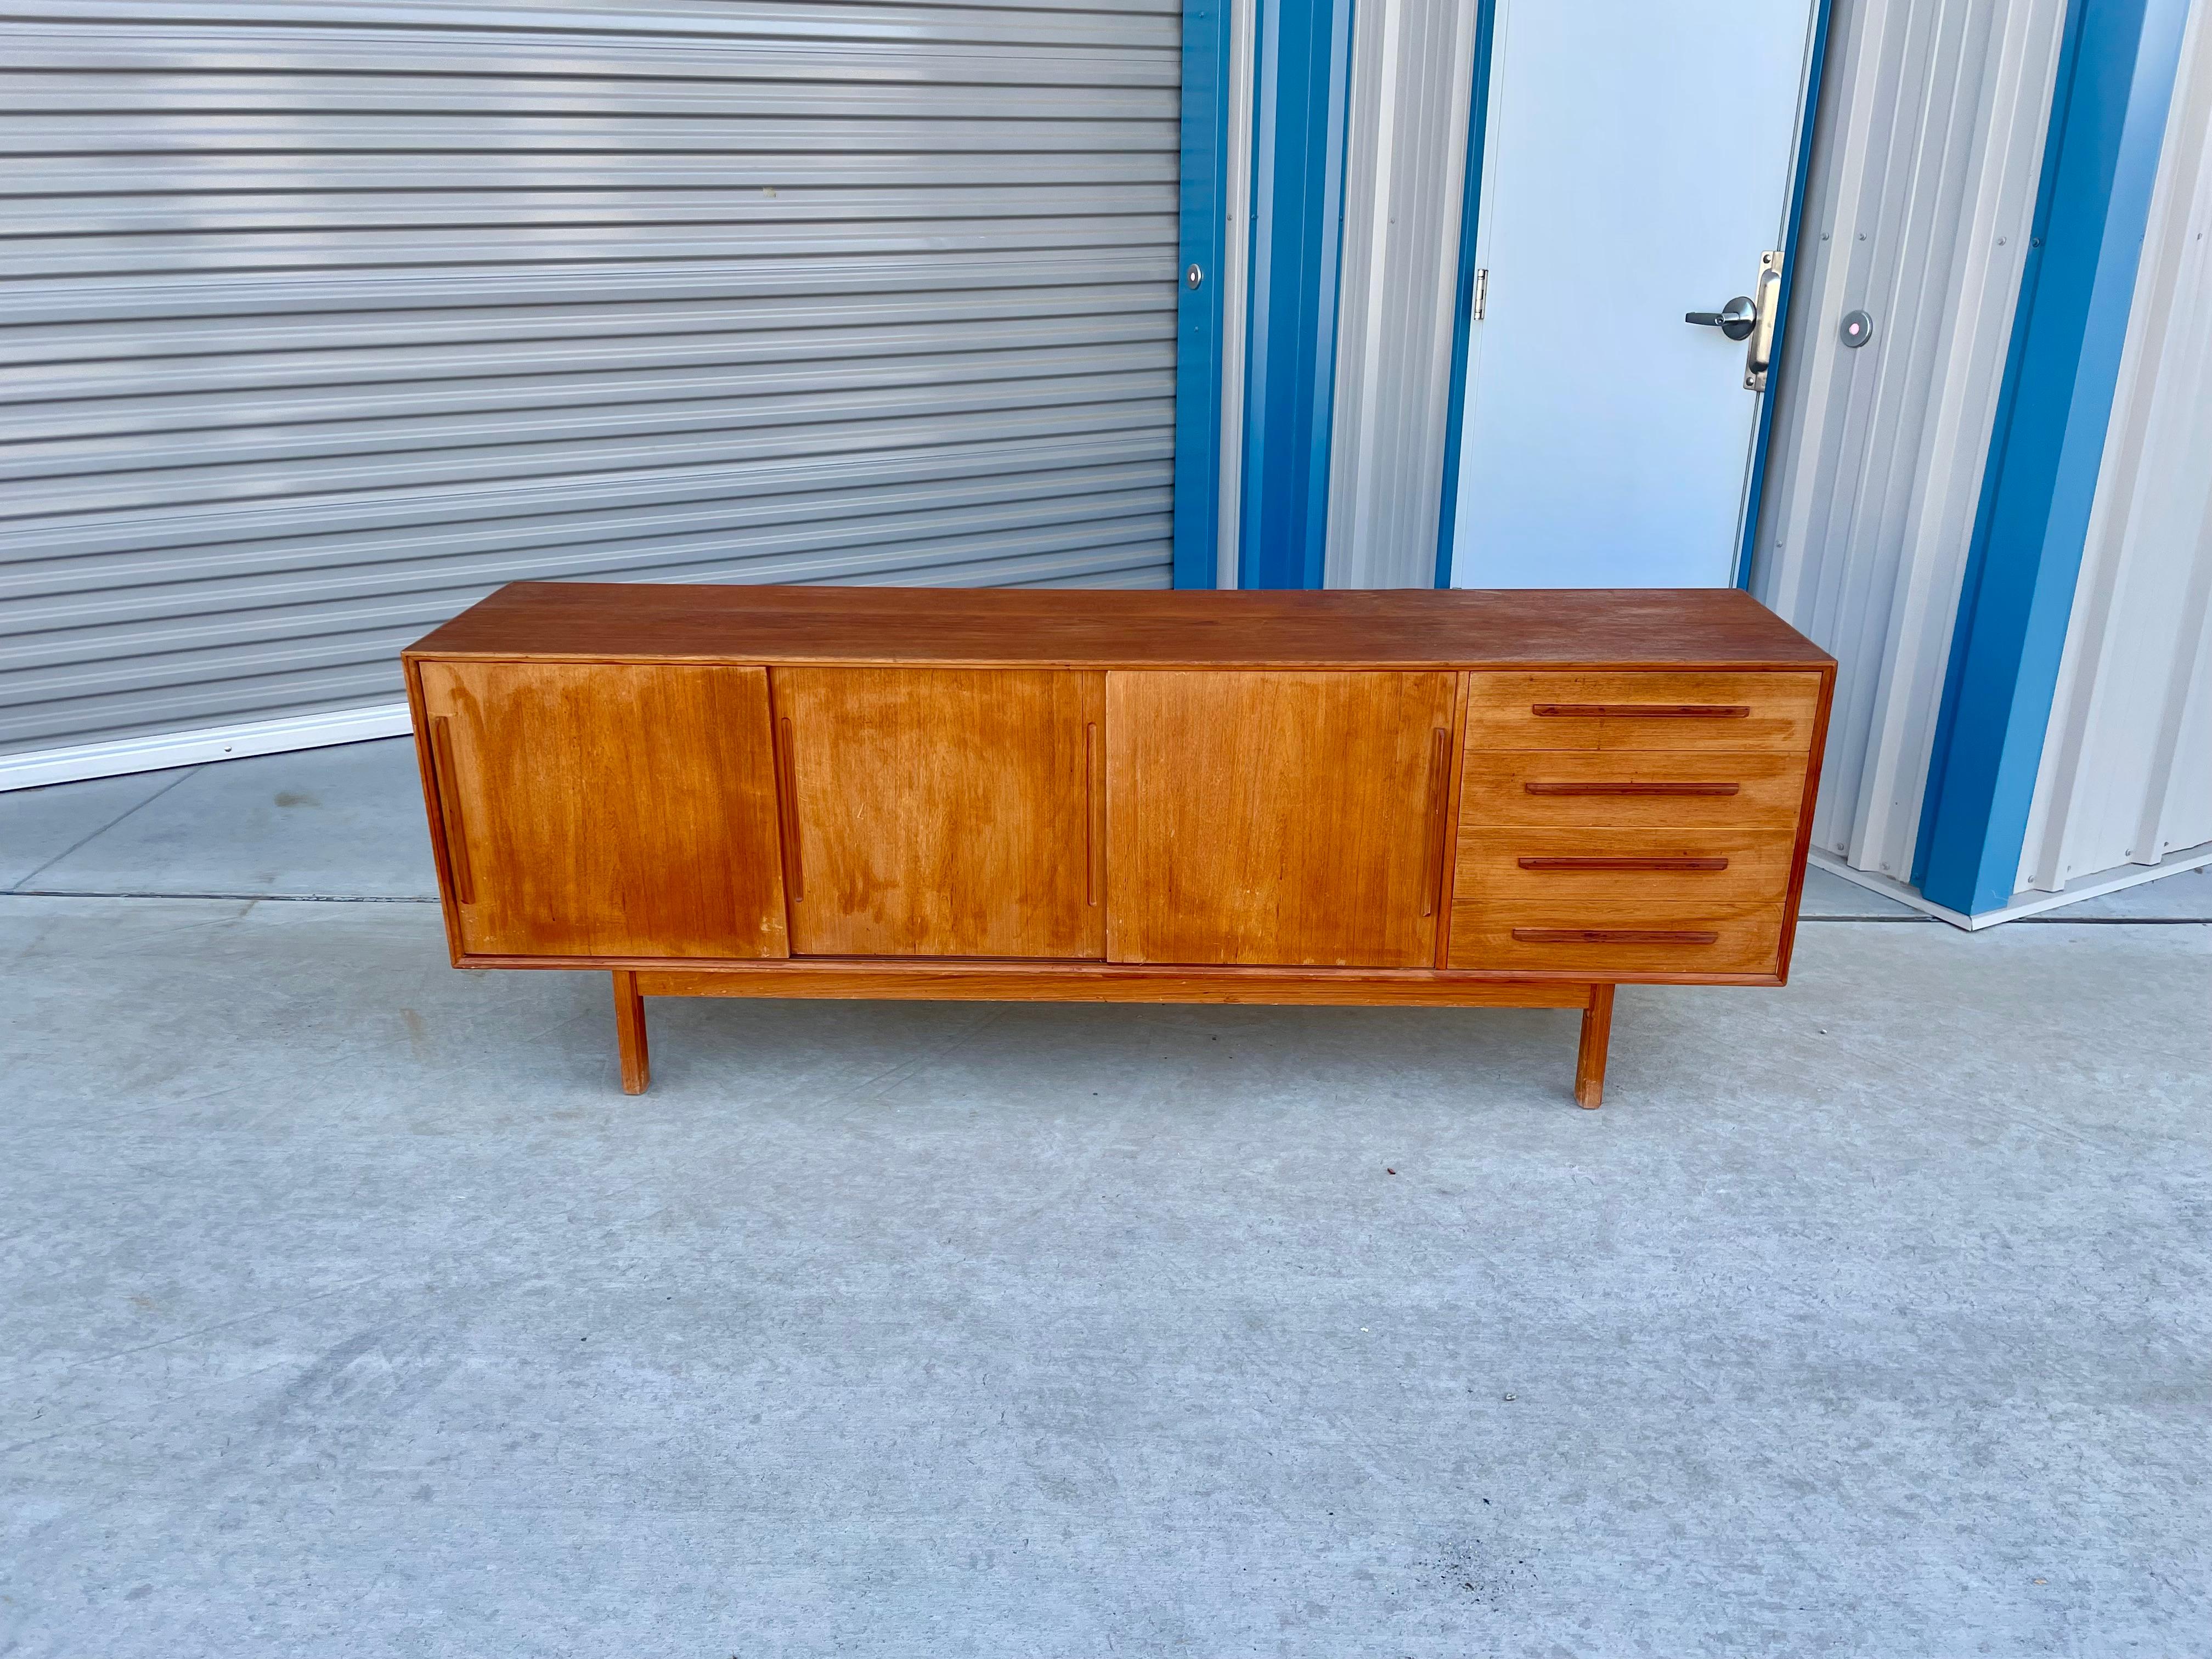 This beautiful Danish modern credenza was designed and manufactured in Denmark in the 1960s. This credenza is built from the highest quality teak wood, which, thanks to the figures given by the grains of the wood, offers a unique contrast throughout